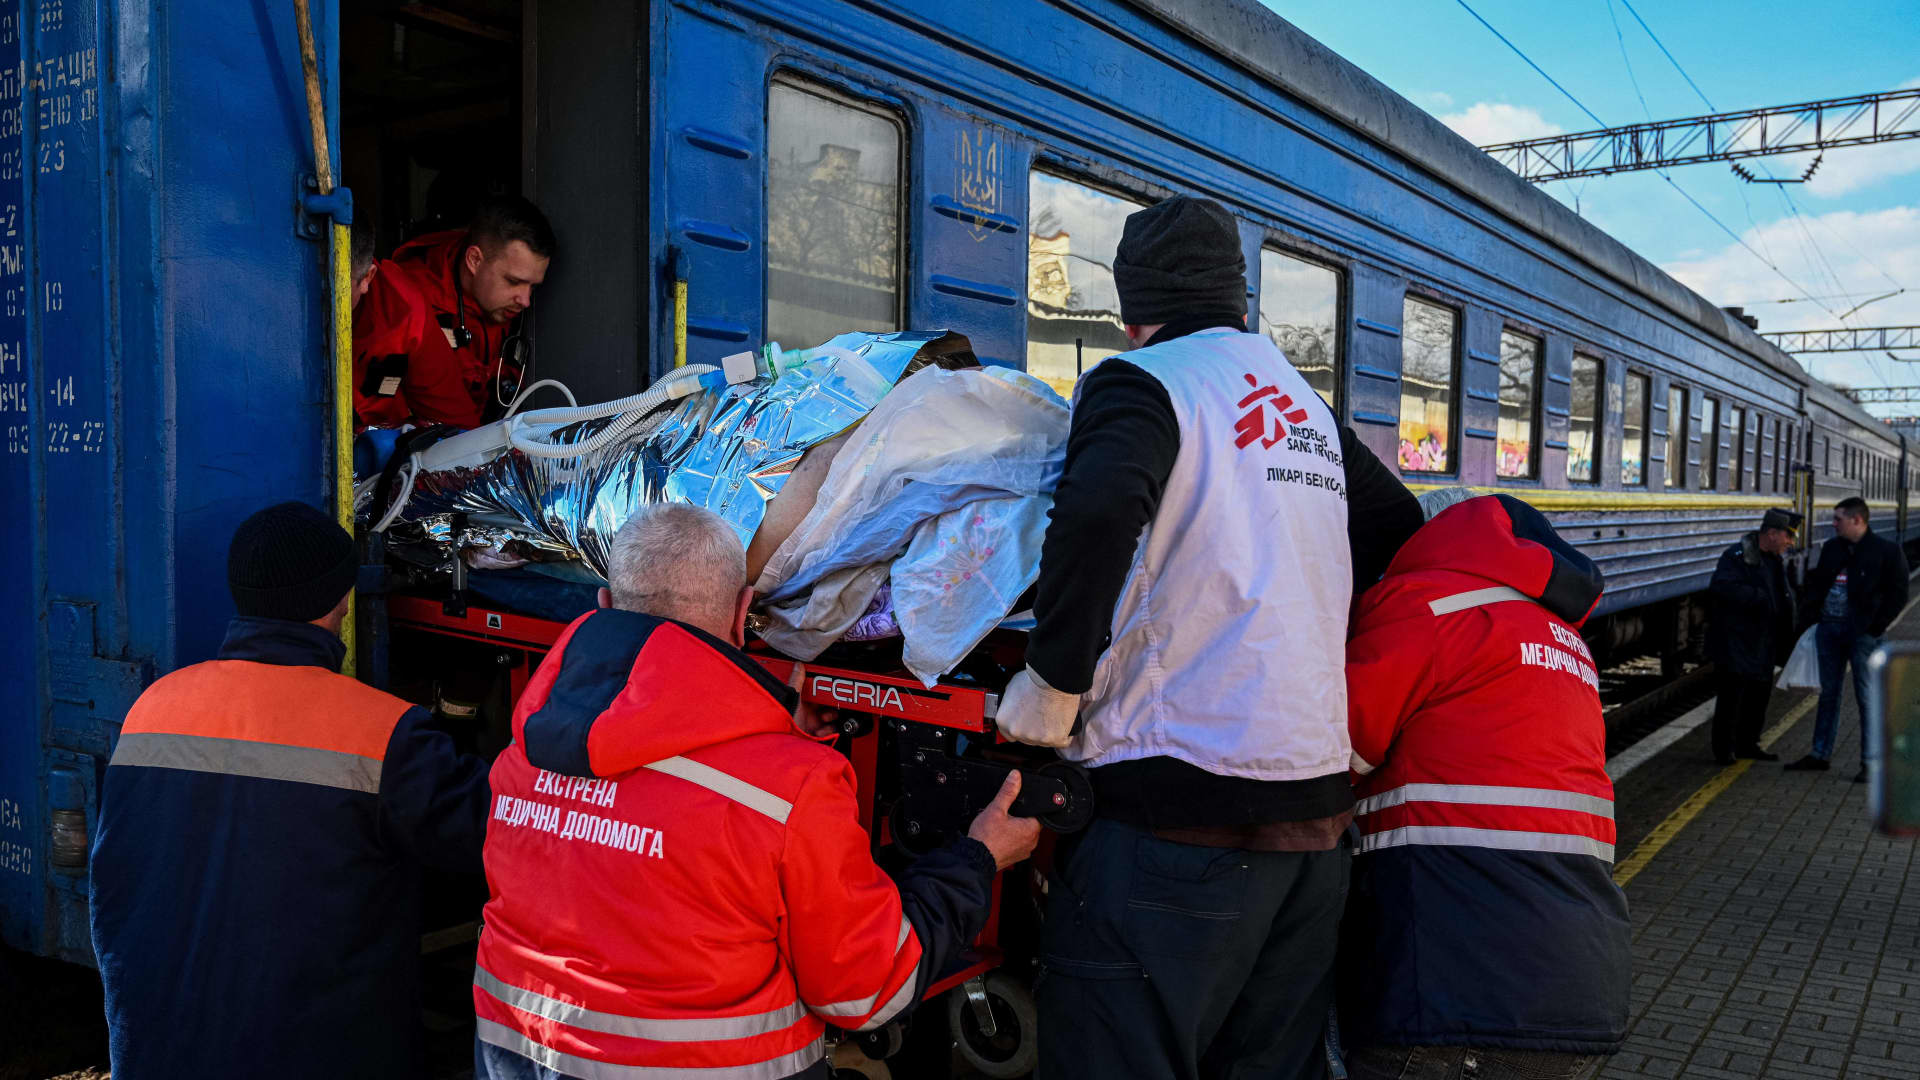 Medical workers, helped by a member of Doctors Without Borders (MSF) NGO, unload a stretcher with a wounded civilian patient upon his arrival from eastern Ukraine to be treated in the western Ukrainian city of Lviv on March 17, 2023, amid the Russian invasion of Ukraine.